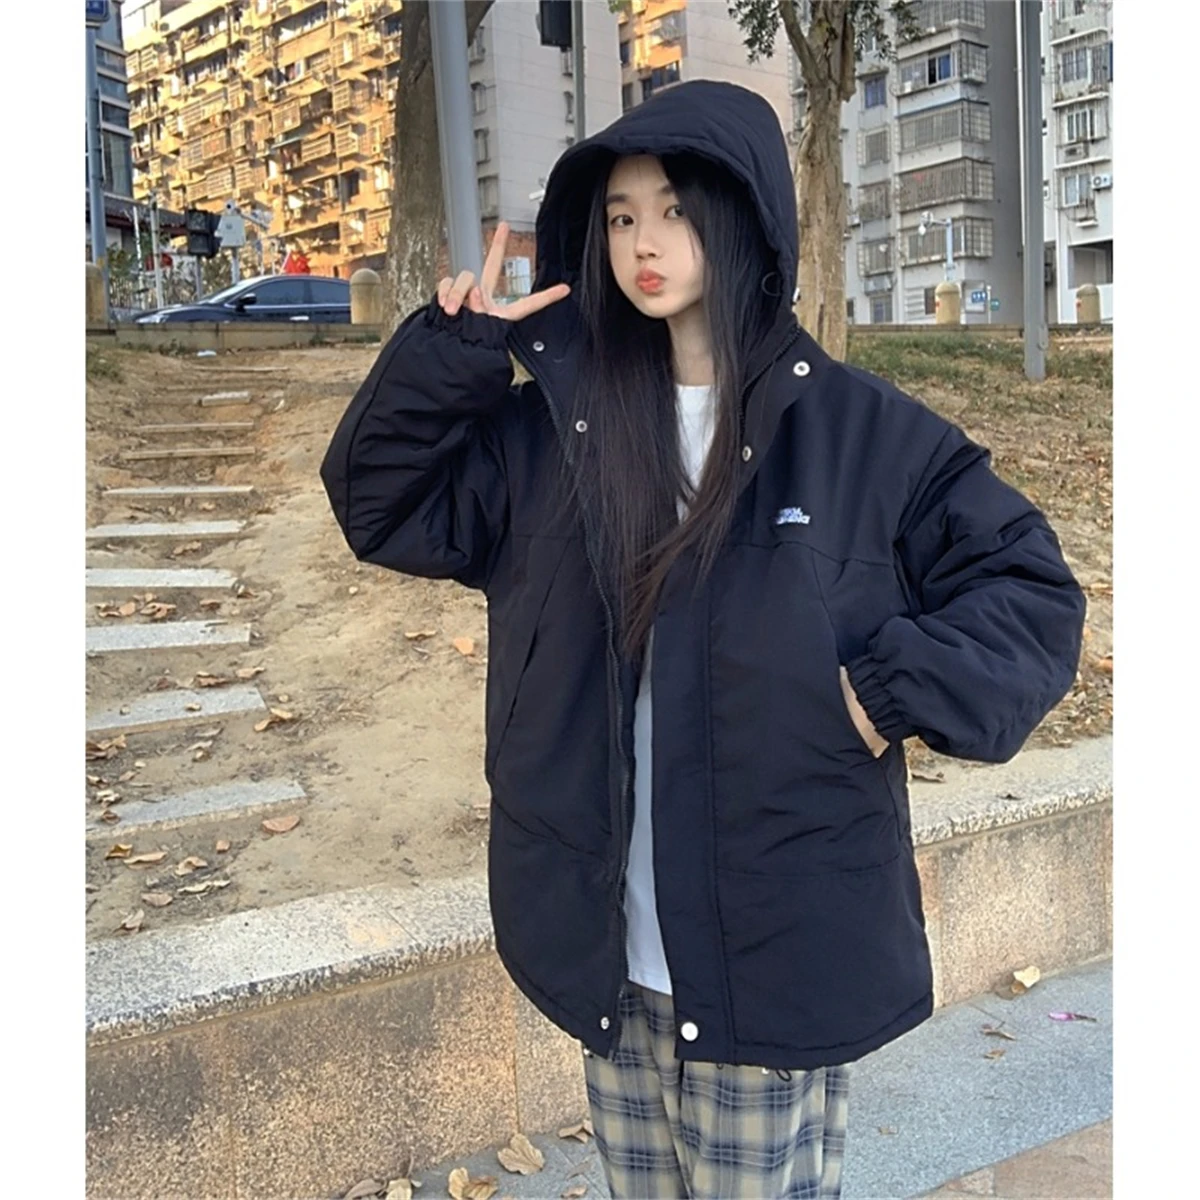 Autumn and Winter 2023 New Type Of Work Clothes, Rush Jacket, Cotton Jacket, Women's Functional Loose Cotton Jacket, Warm Hooded enlarge